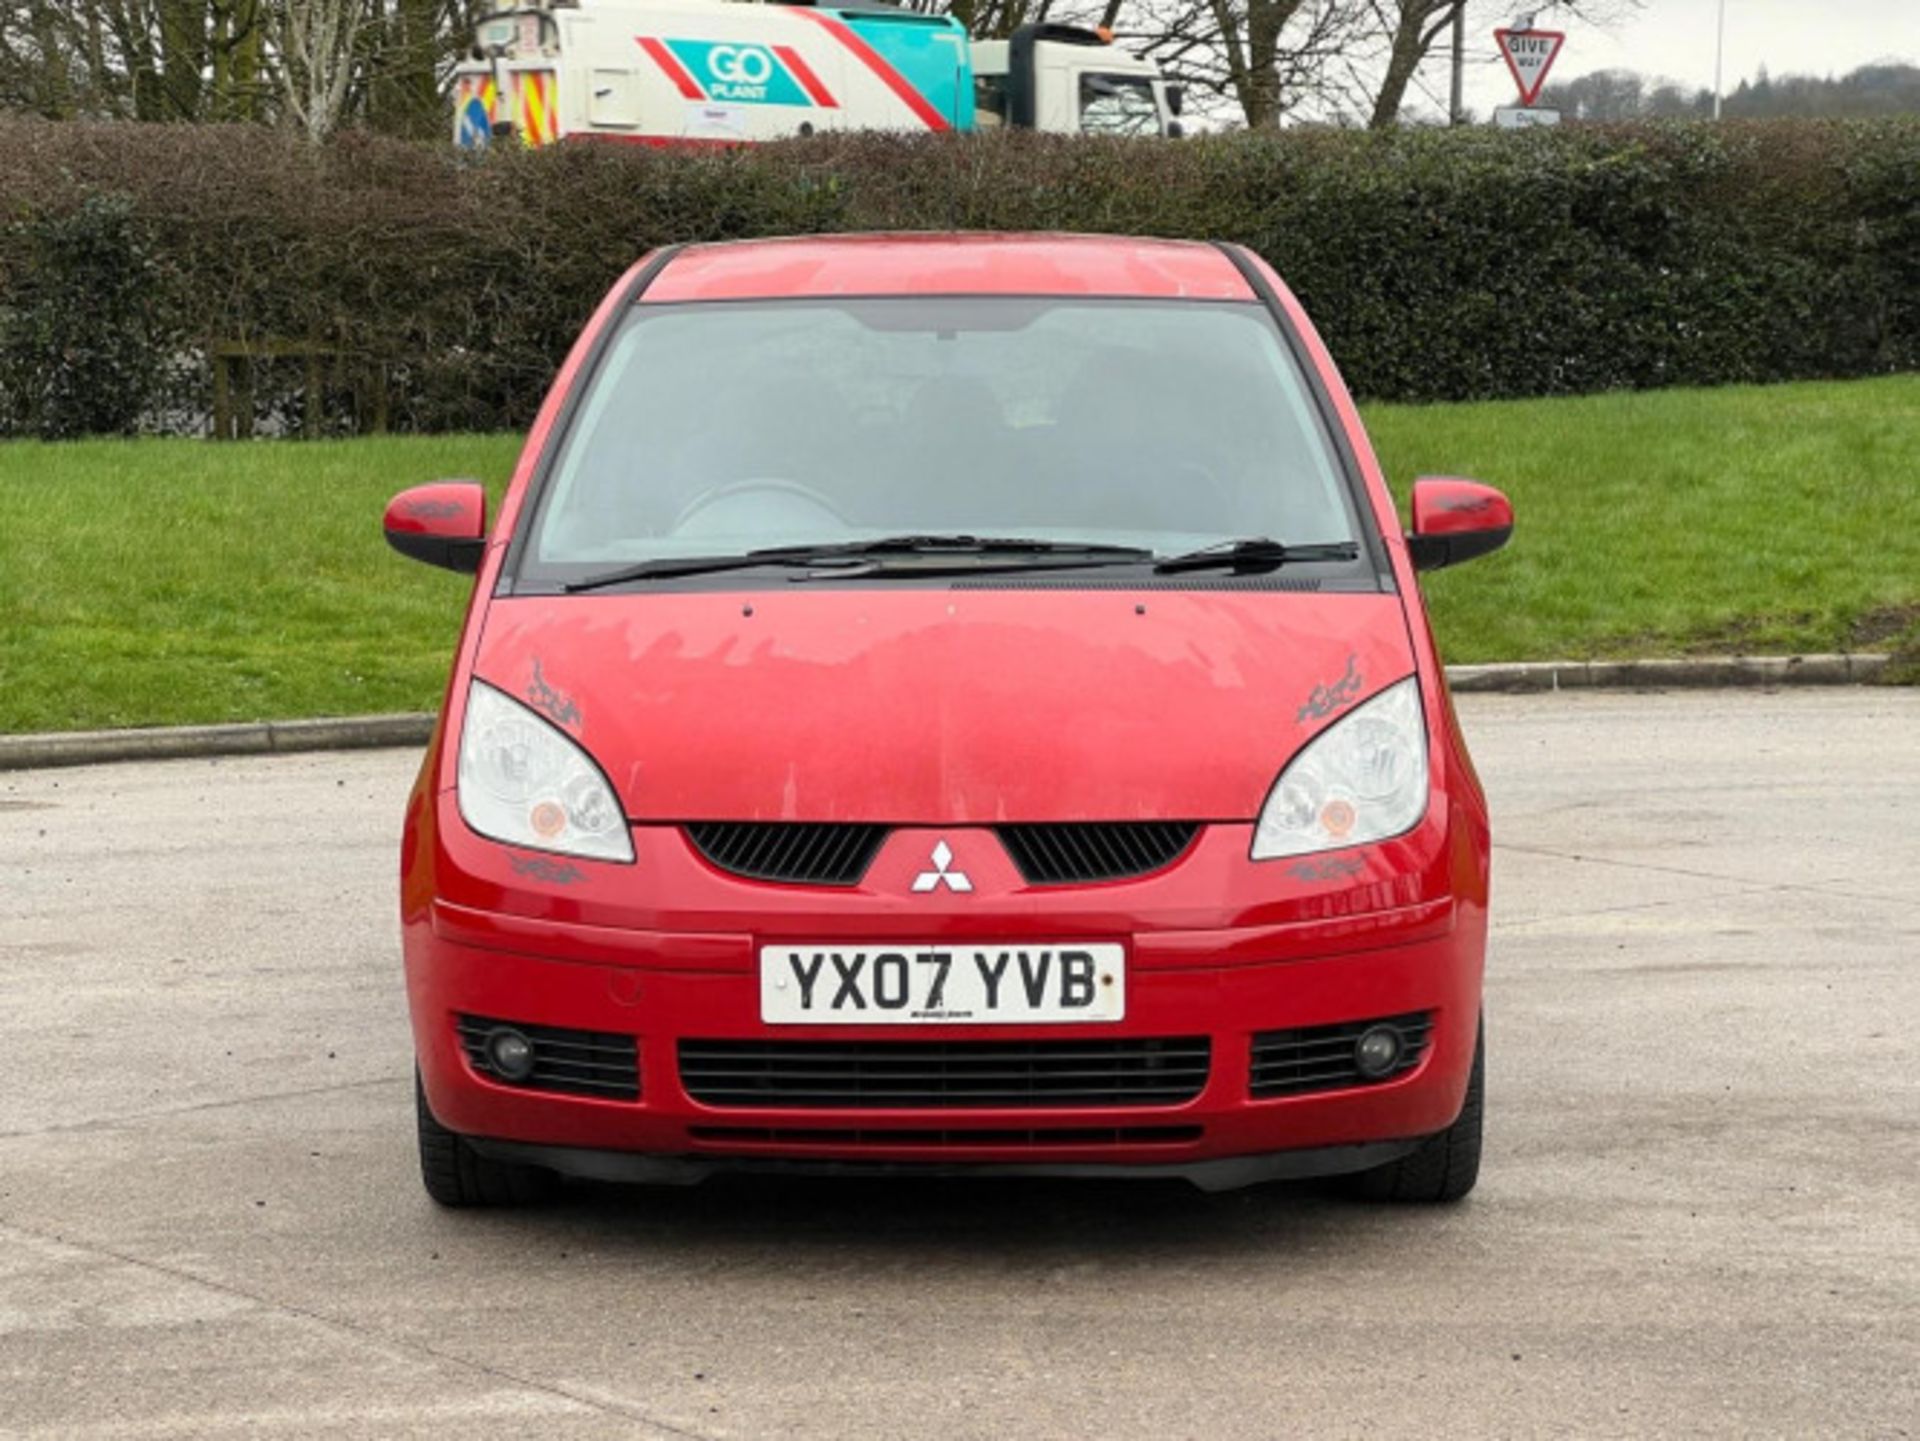 2007 MITSUBISHI COLT 1.5 DI-D DIESEL AUTOMATIC >>--NO VAT ON HAMMER--<< - Image 179 of 191